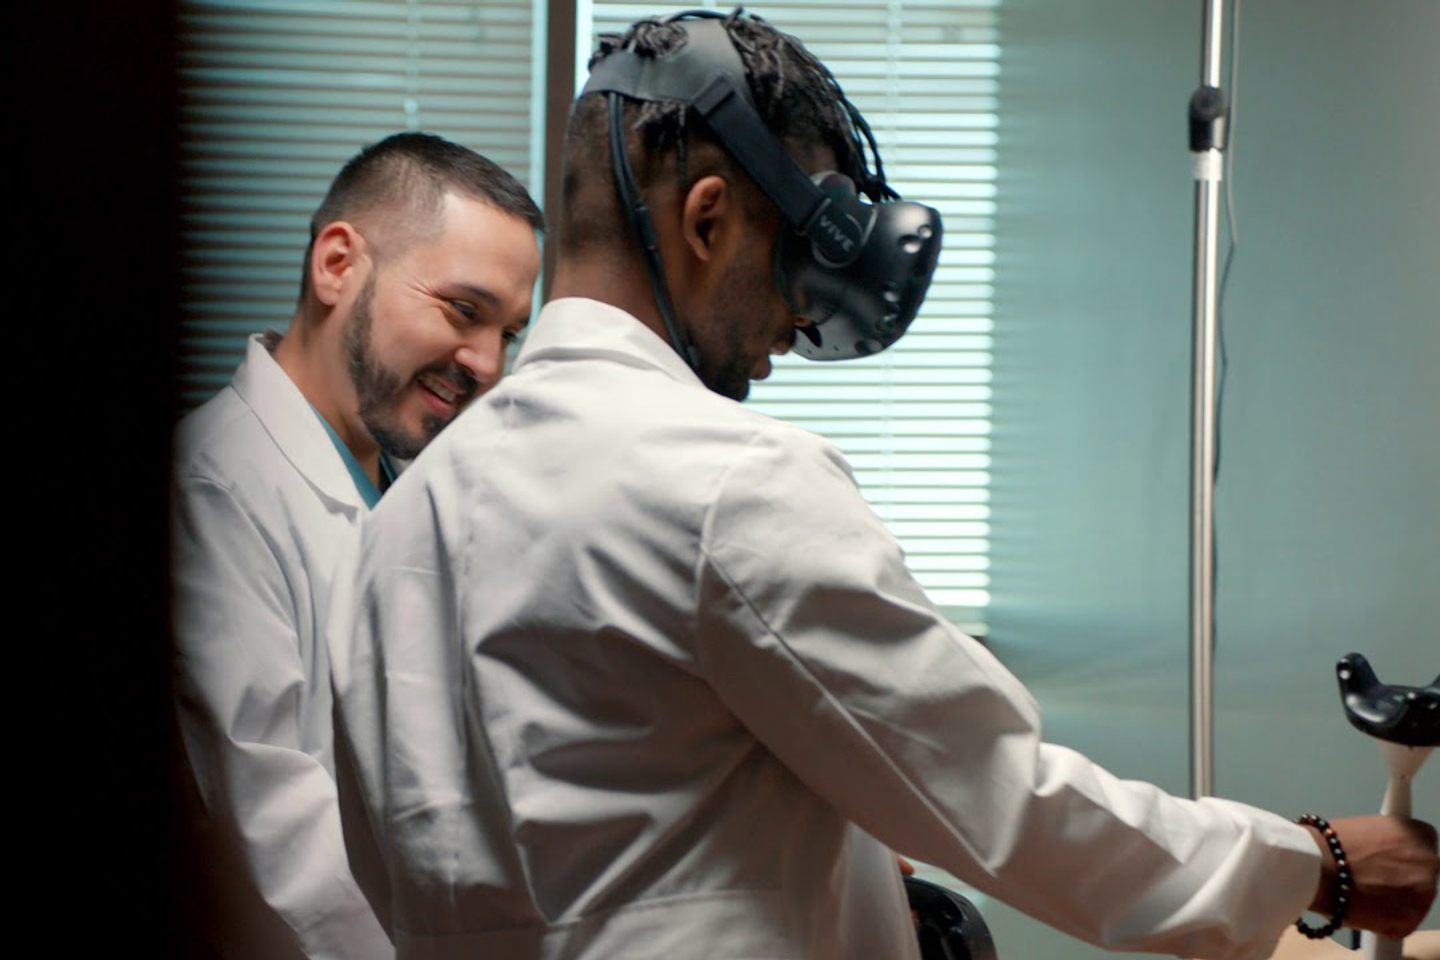 A med student wears a virtual reality headset while a colleague looks on.